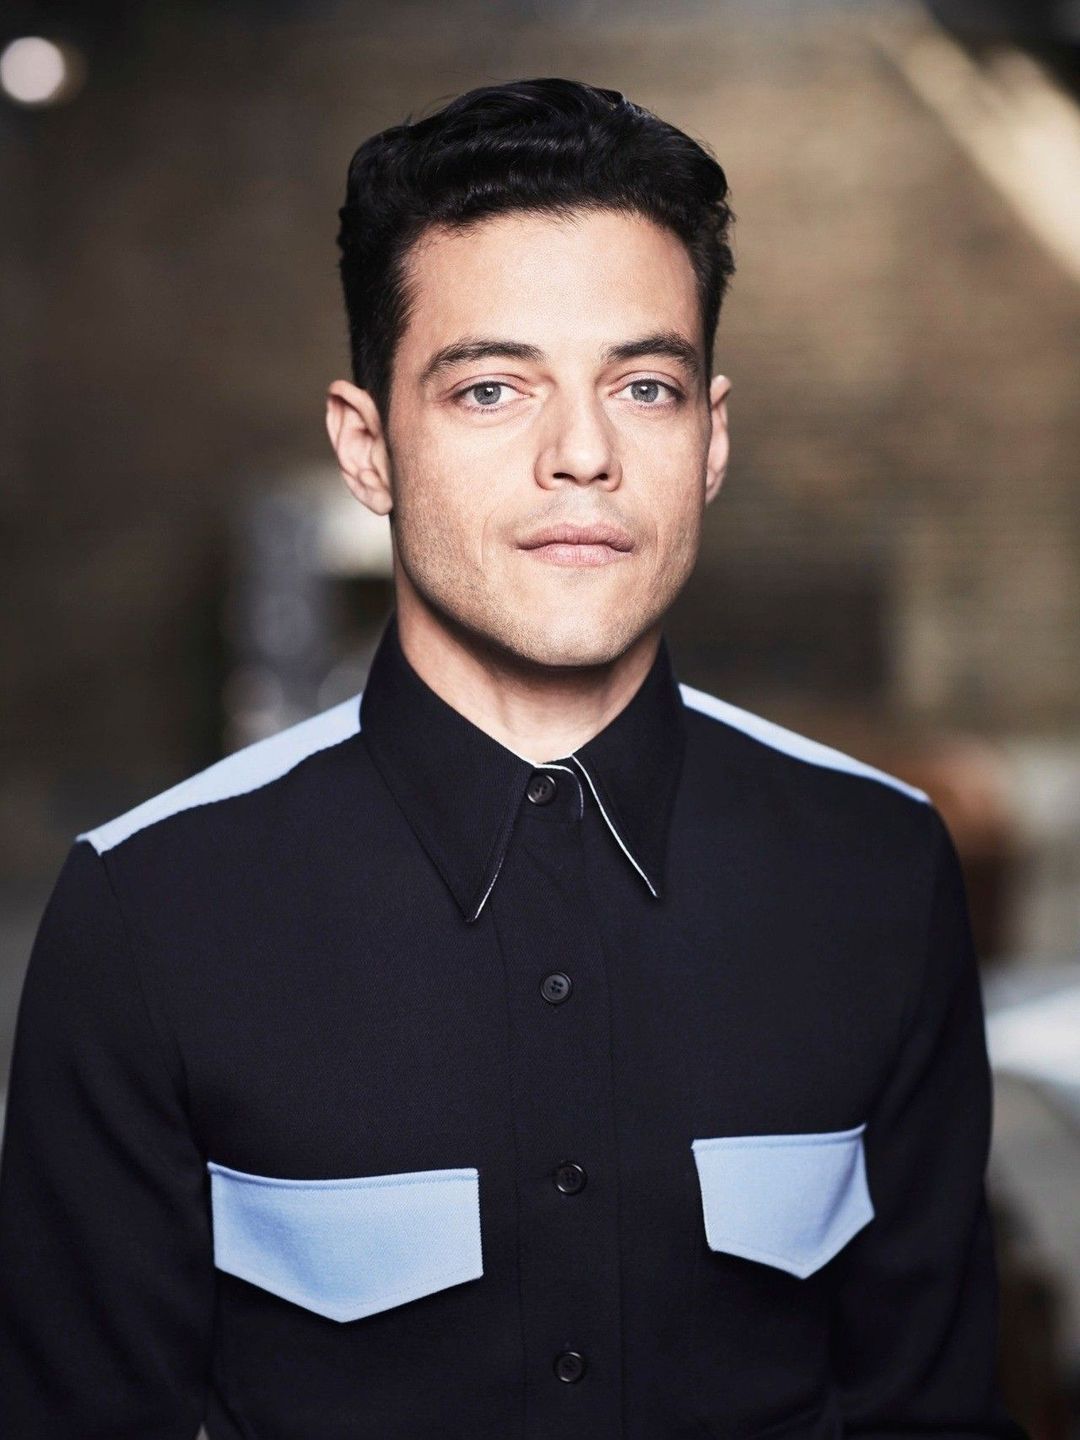 Rami Malek who are his parents